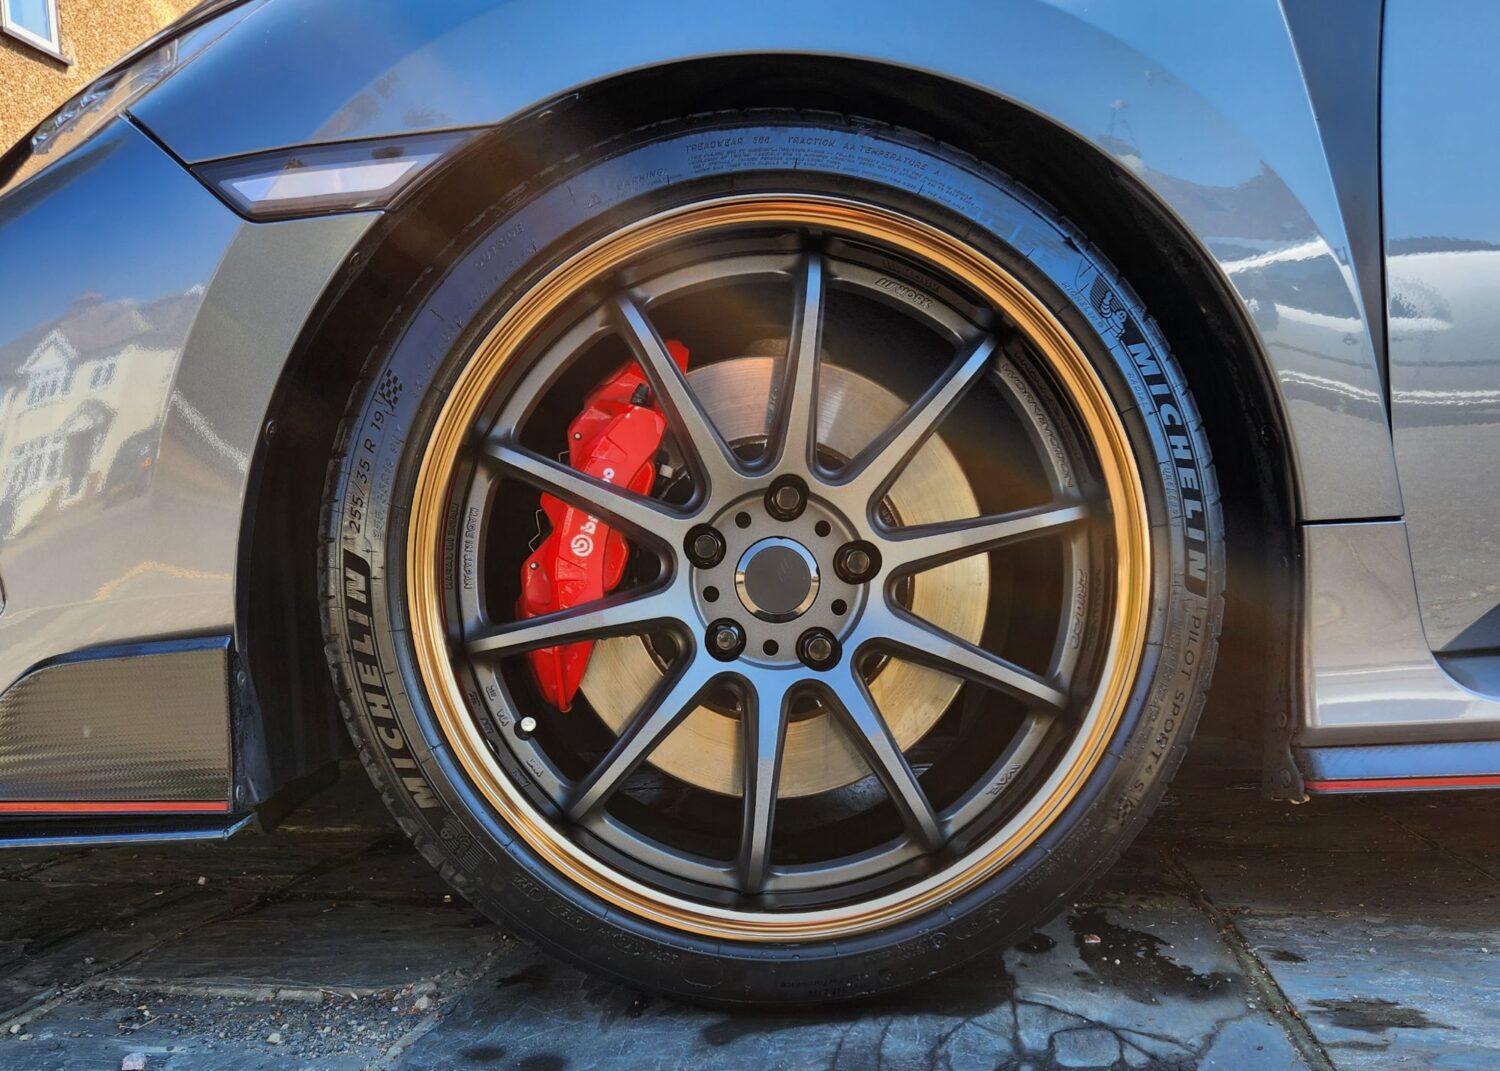 Honda Civic Type-R with 19×9.5-inch Work Emotion ZR10